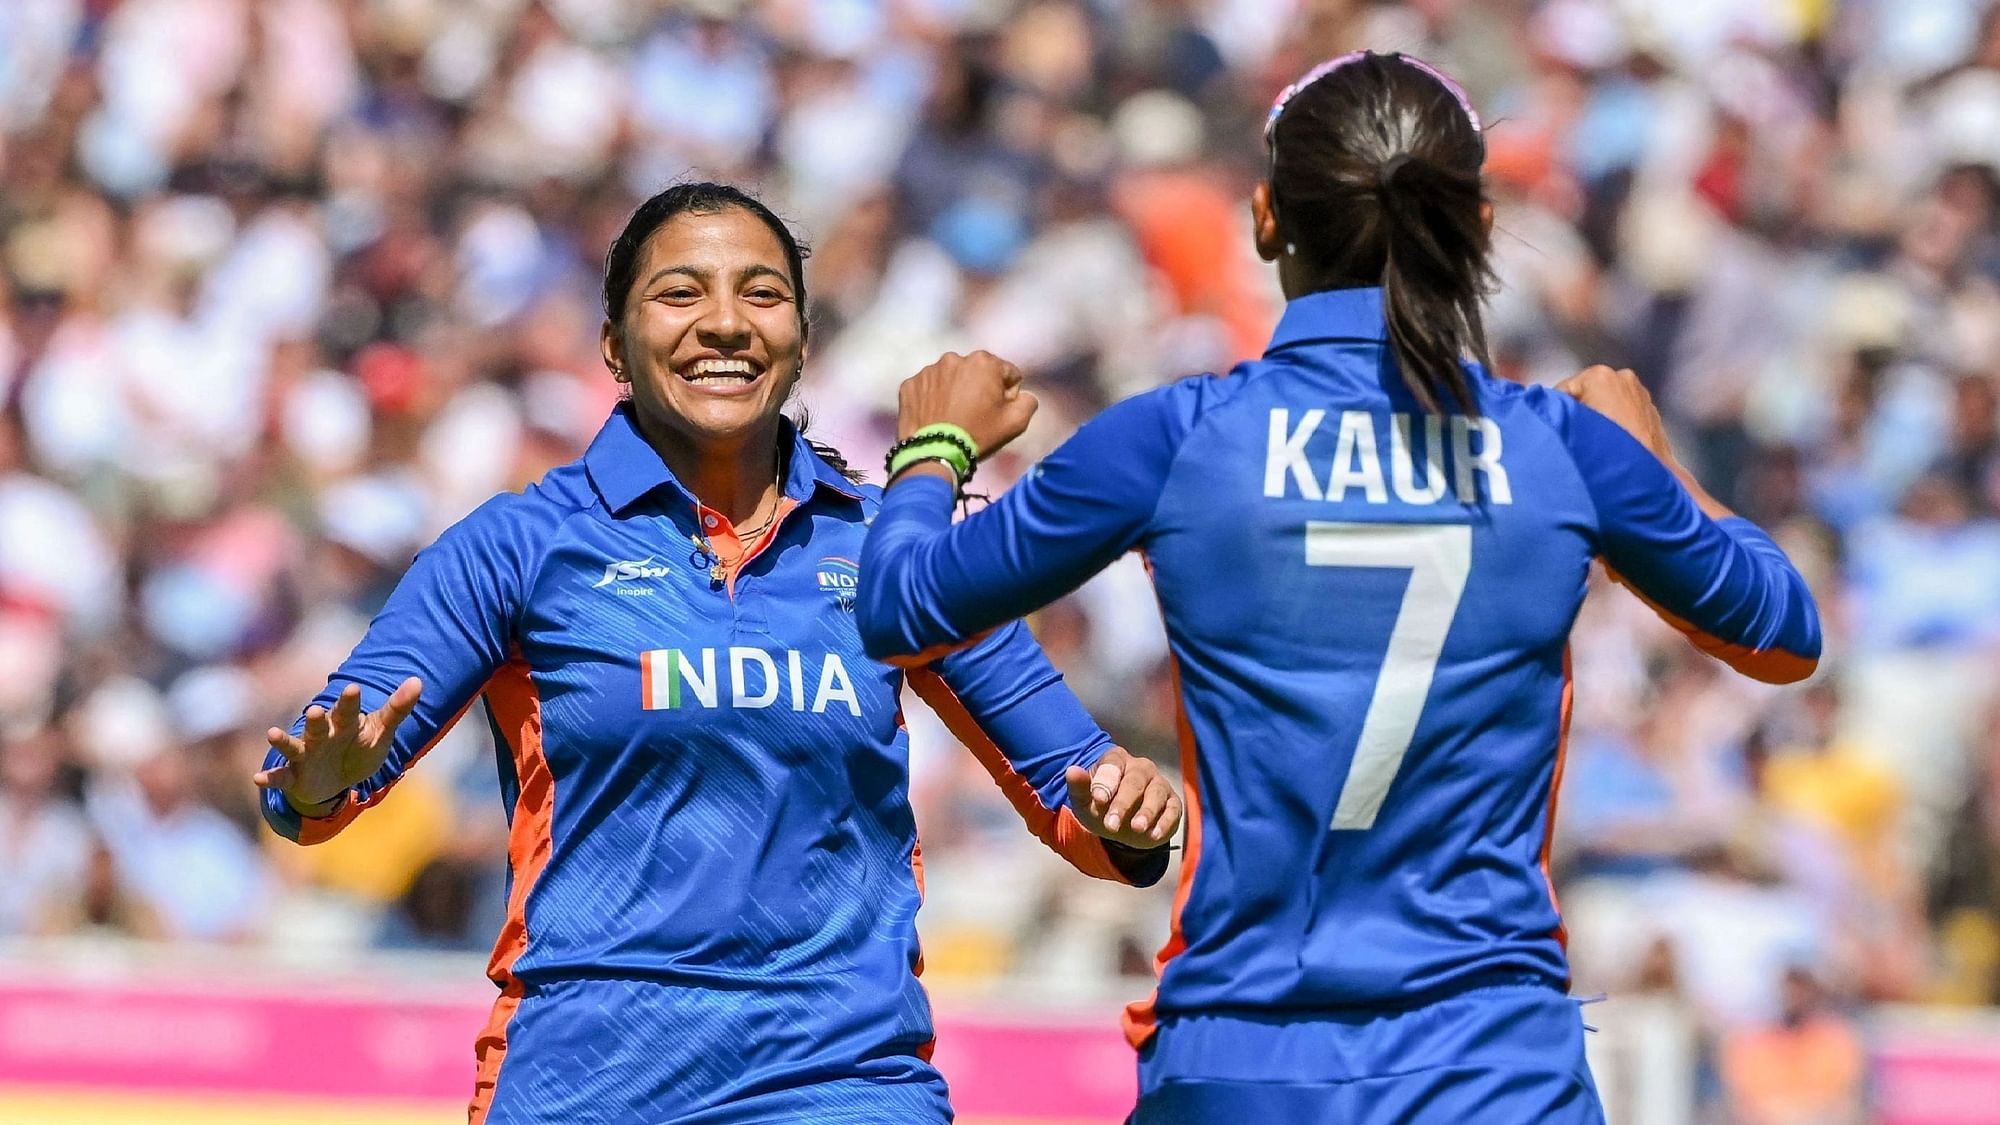 India Women vs England Women 1st T20I Live Streaming Date, When and Where to Watch the Match in India; Latest Updates Here